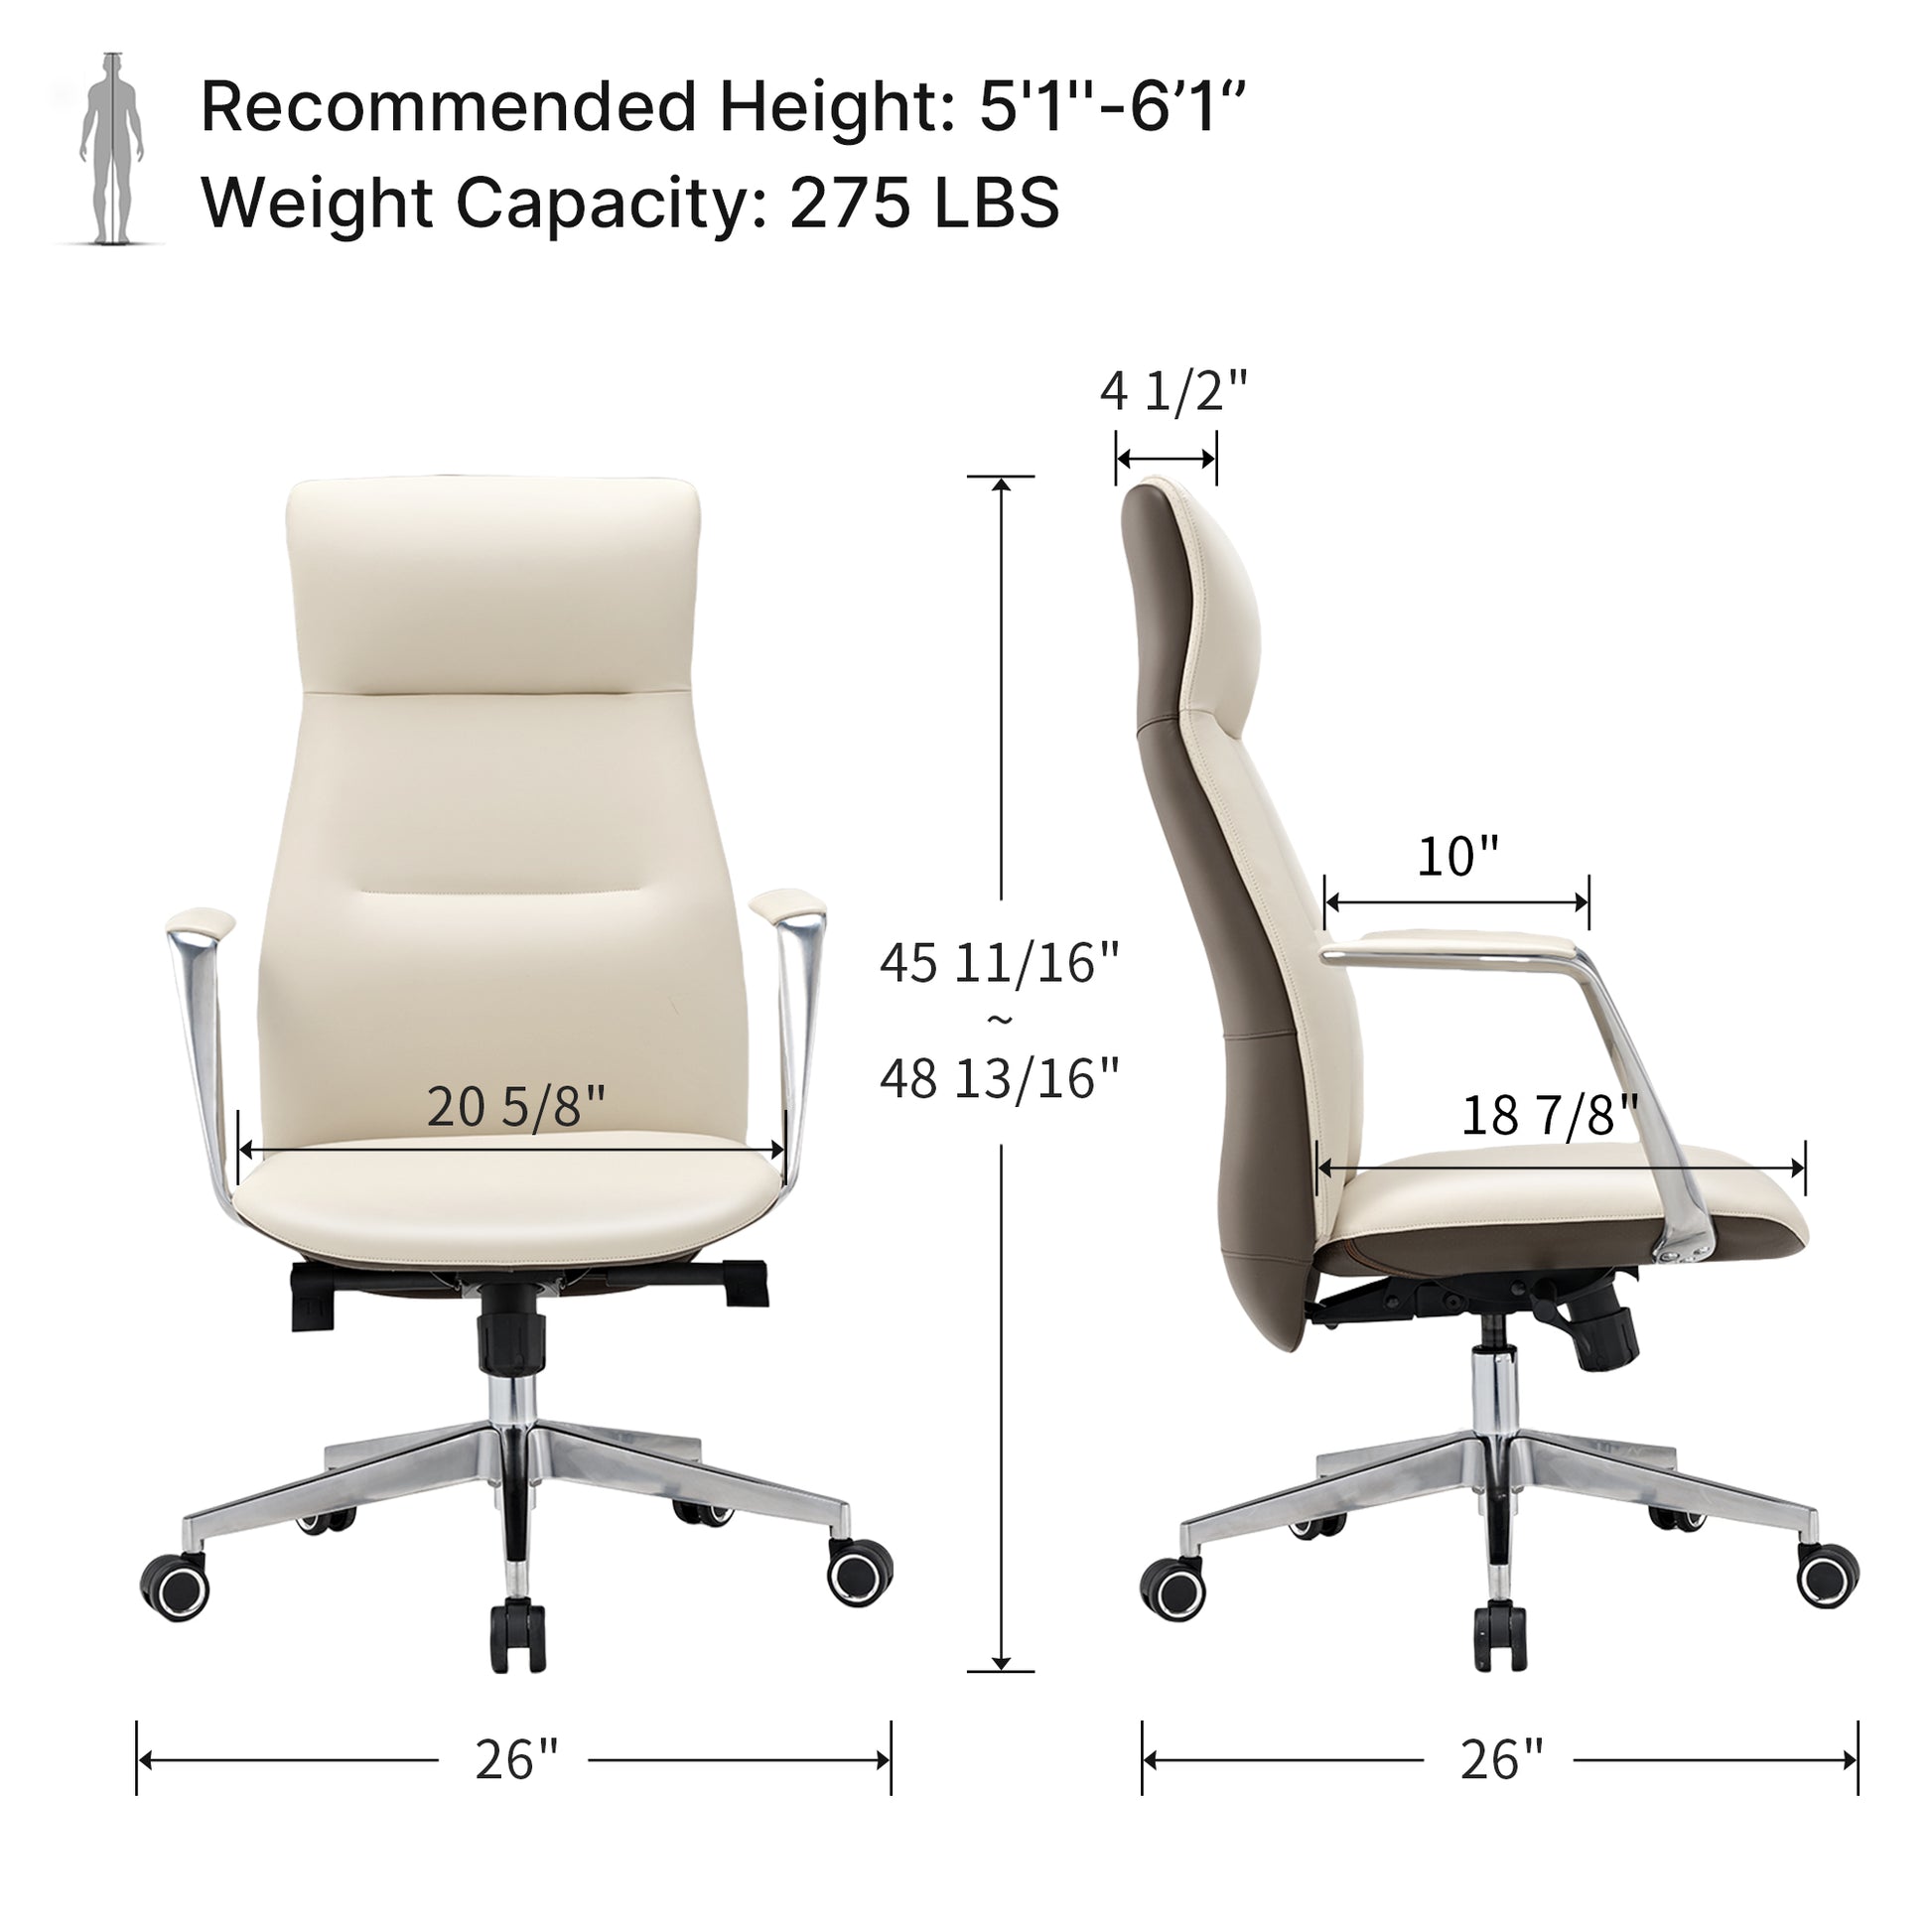 Royal Slim OC08 Leather High Back Executive Office Chair, Beige White in High End Office Rear Image